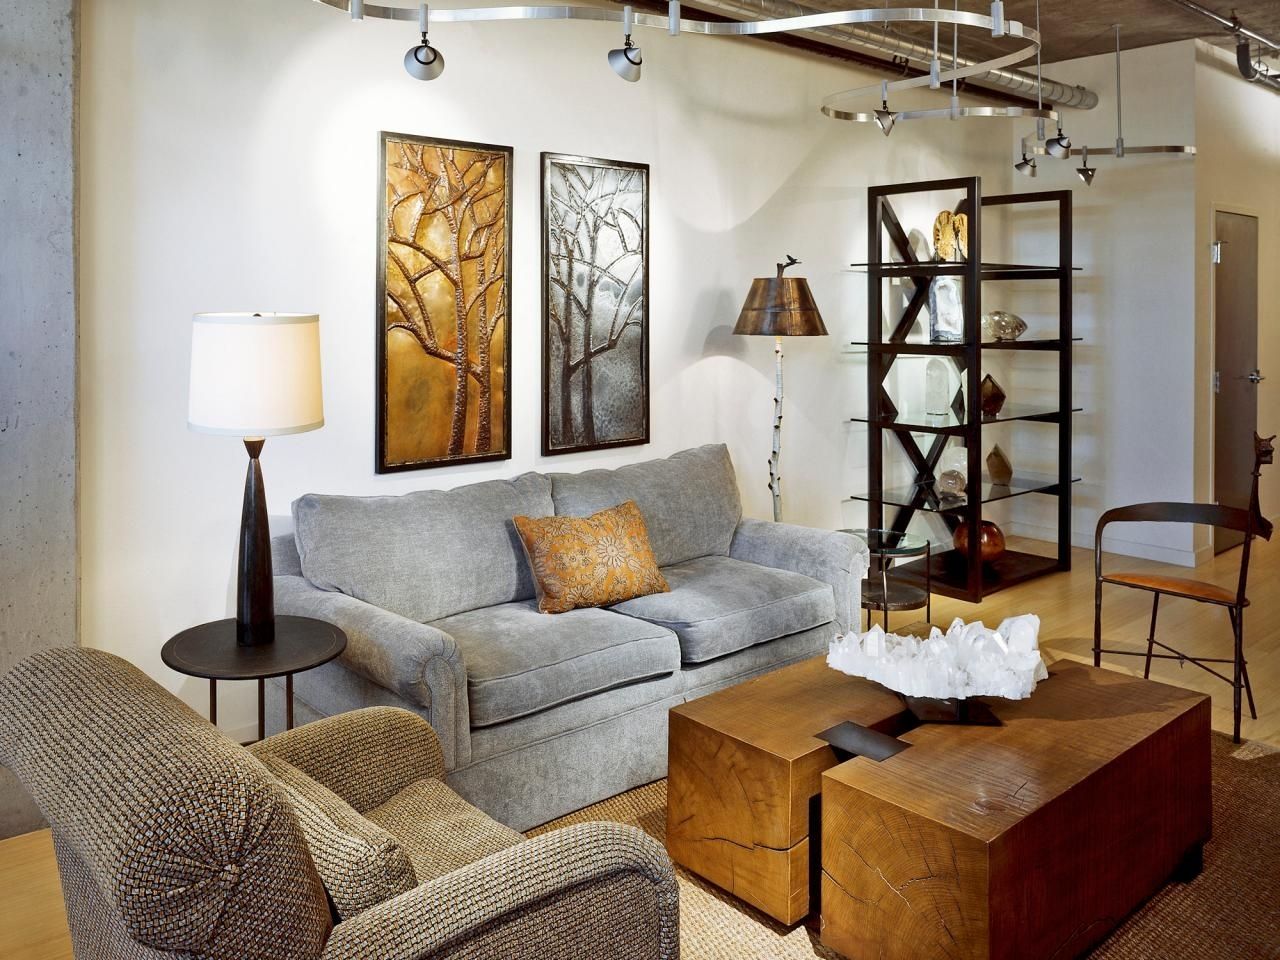 Livingroom : Some Useful Lighting Ideas Living Room Interior Design For Houzz Living Room Table Lamps (View 8 of 15)